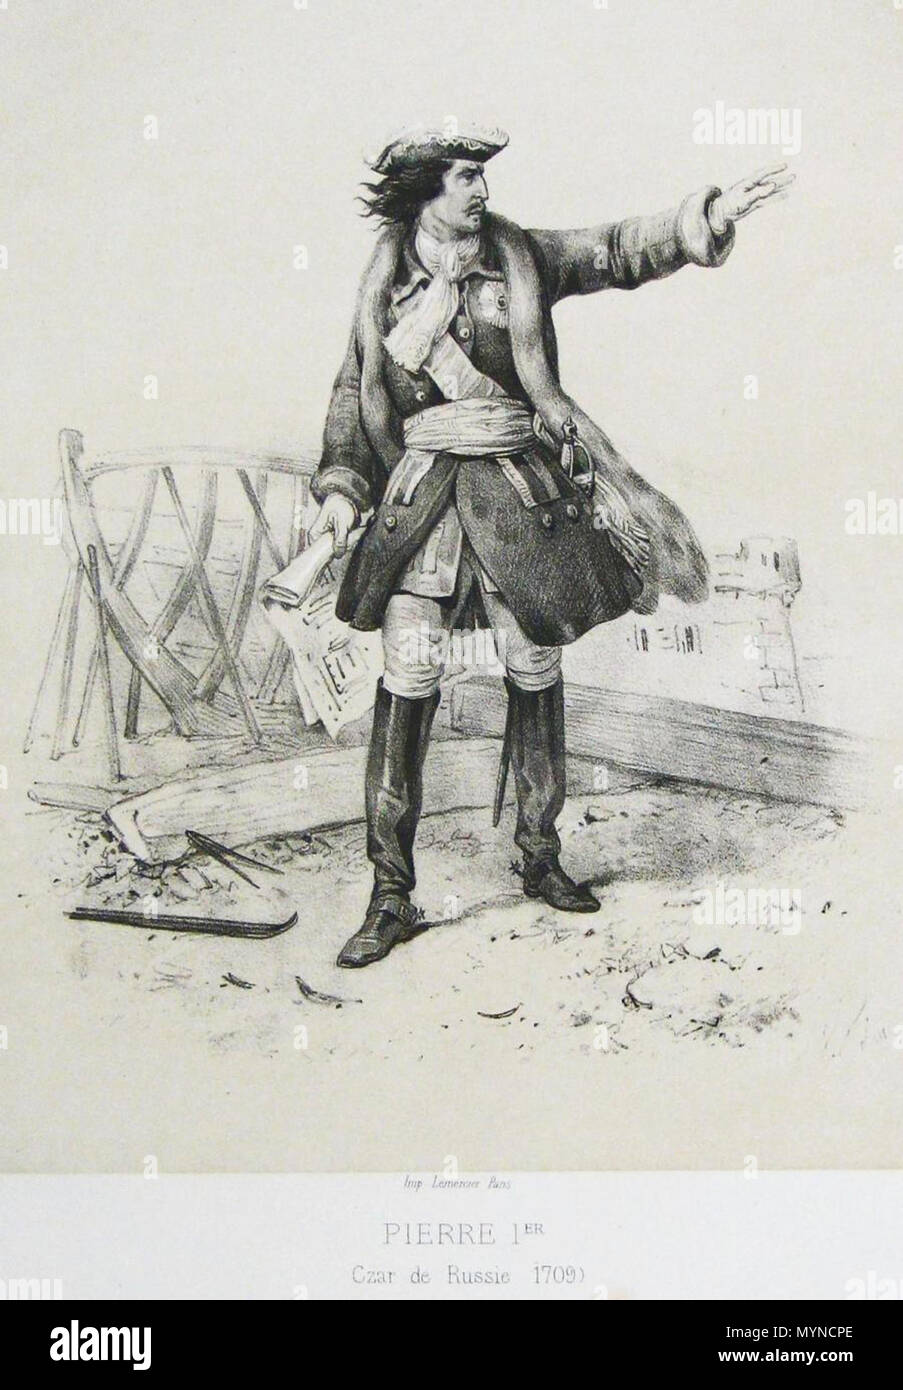 . Russian tsar Peter I The Greate in 1709. French engraving of XIX c. middle of XIX c.. french artist Lemersoue 417 Peter I of Russia in 1709 Stock Photo